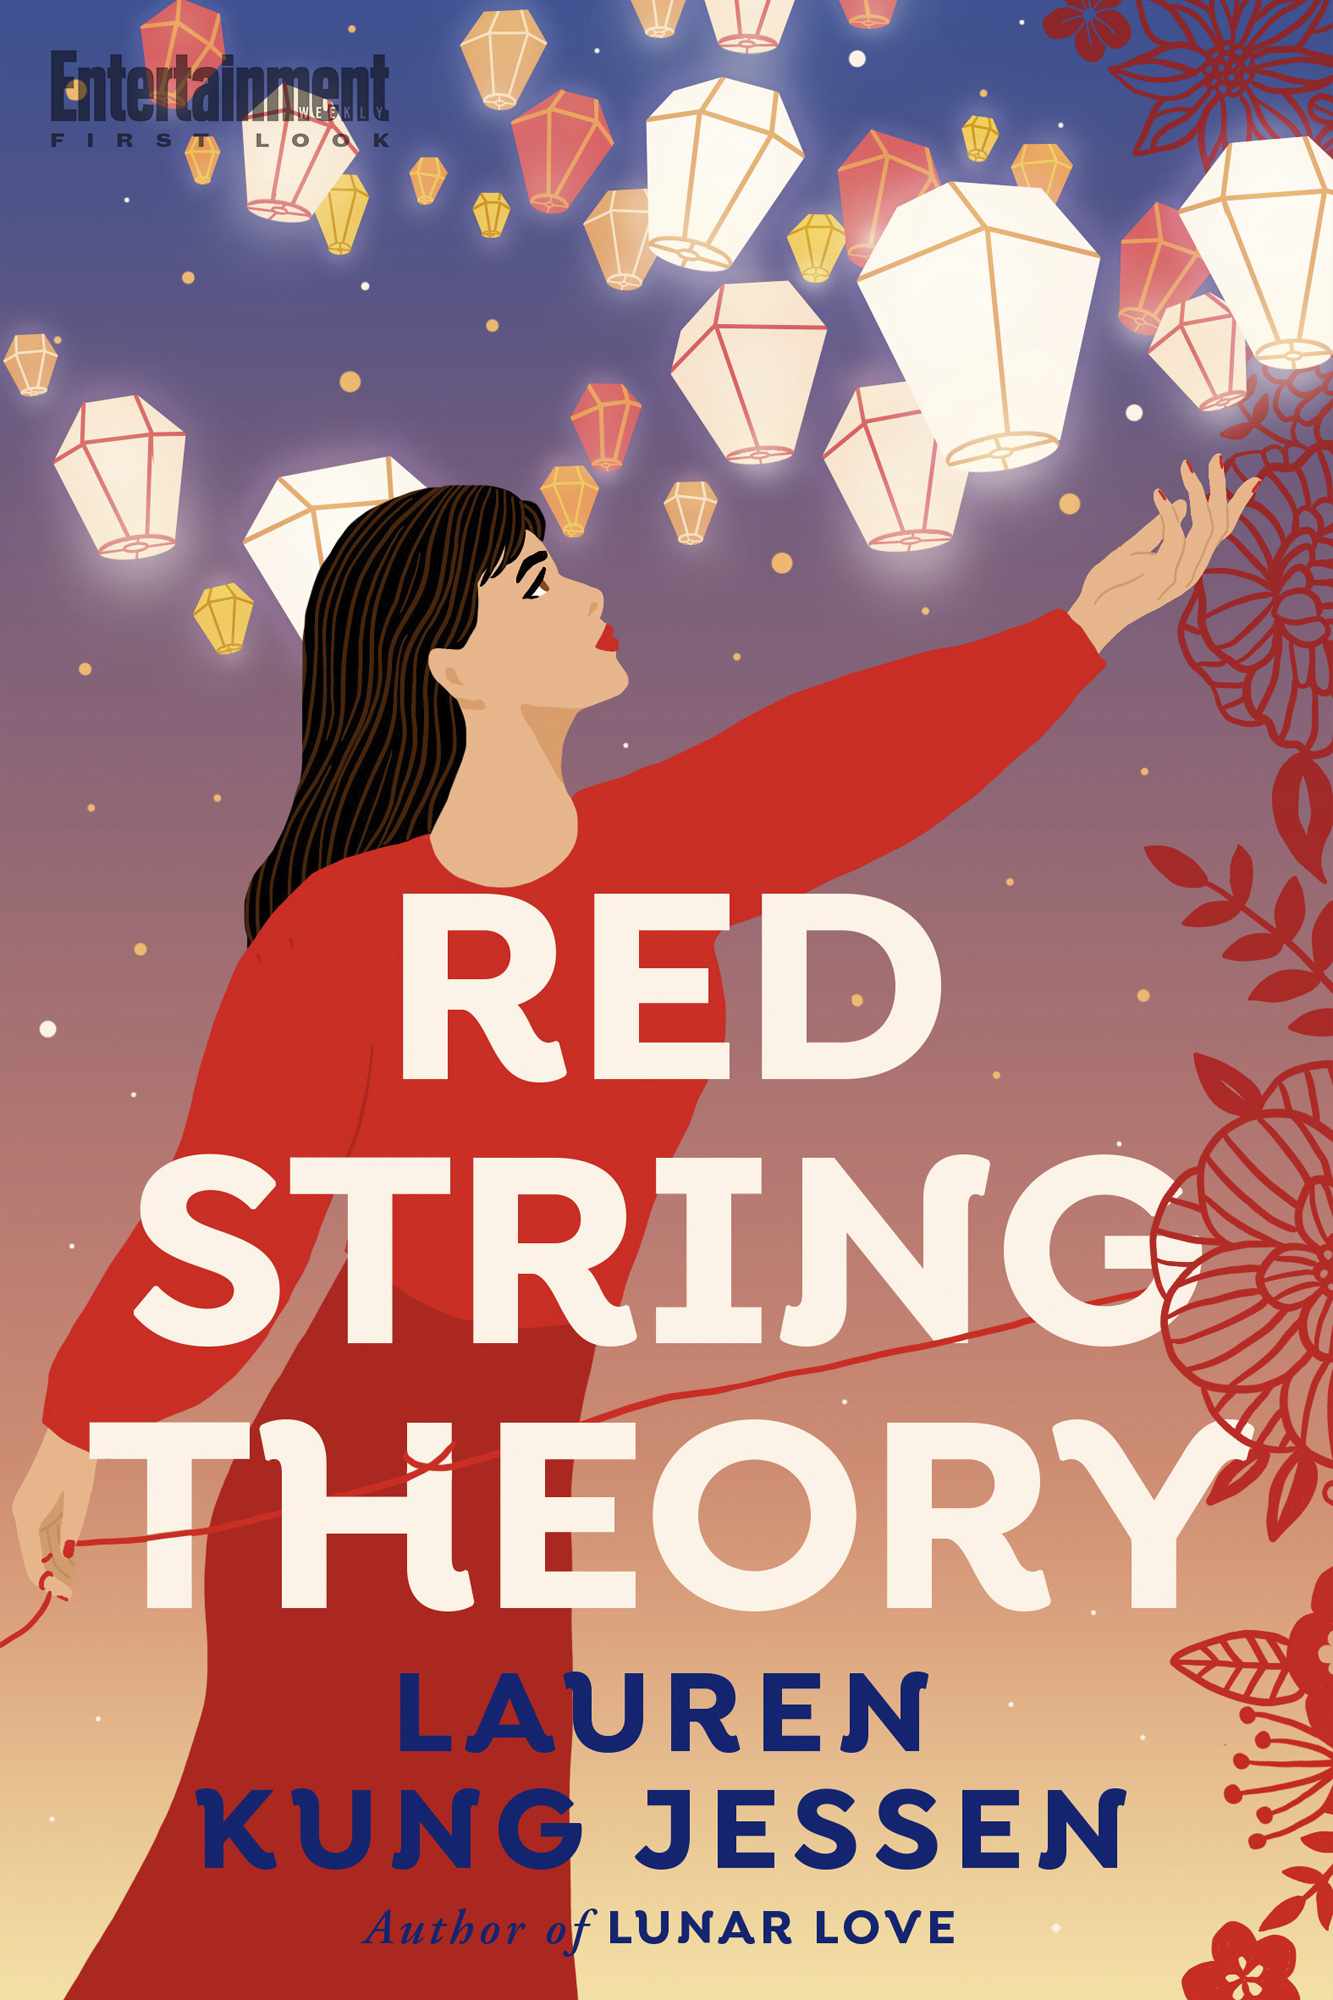 Lauren Kung Jessen Red String Theory first look